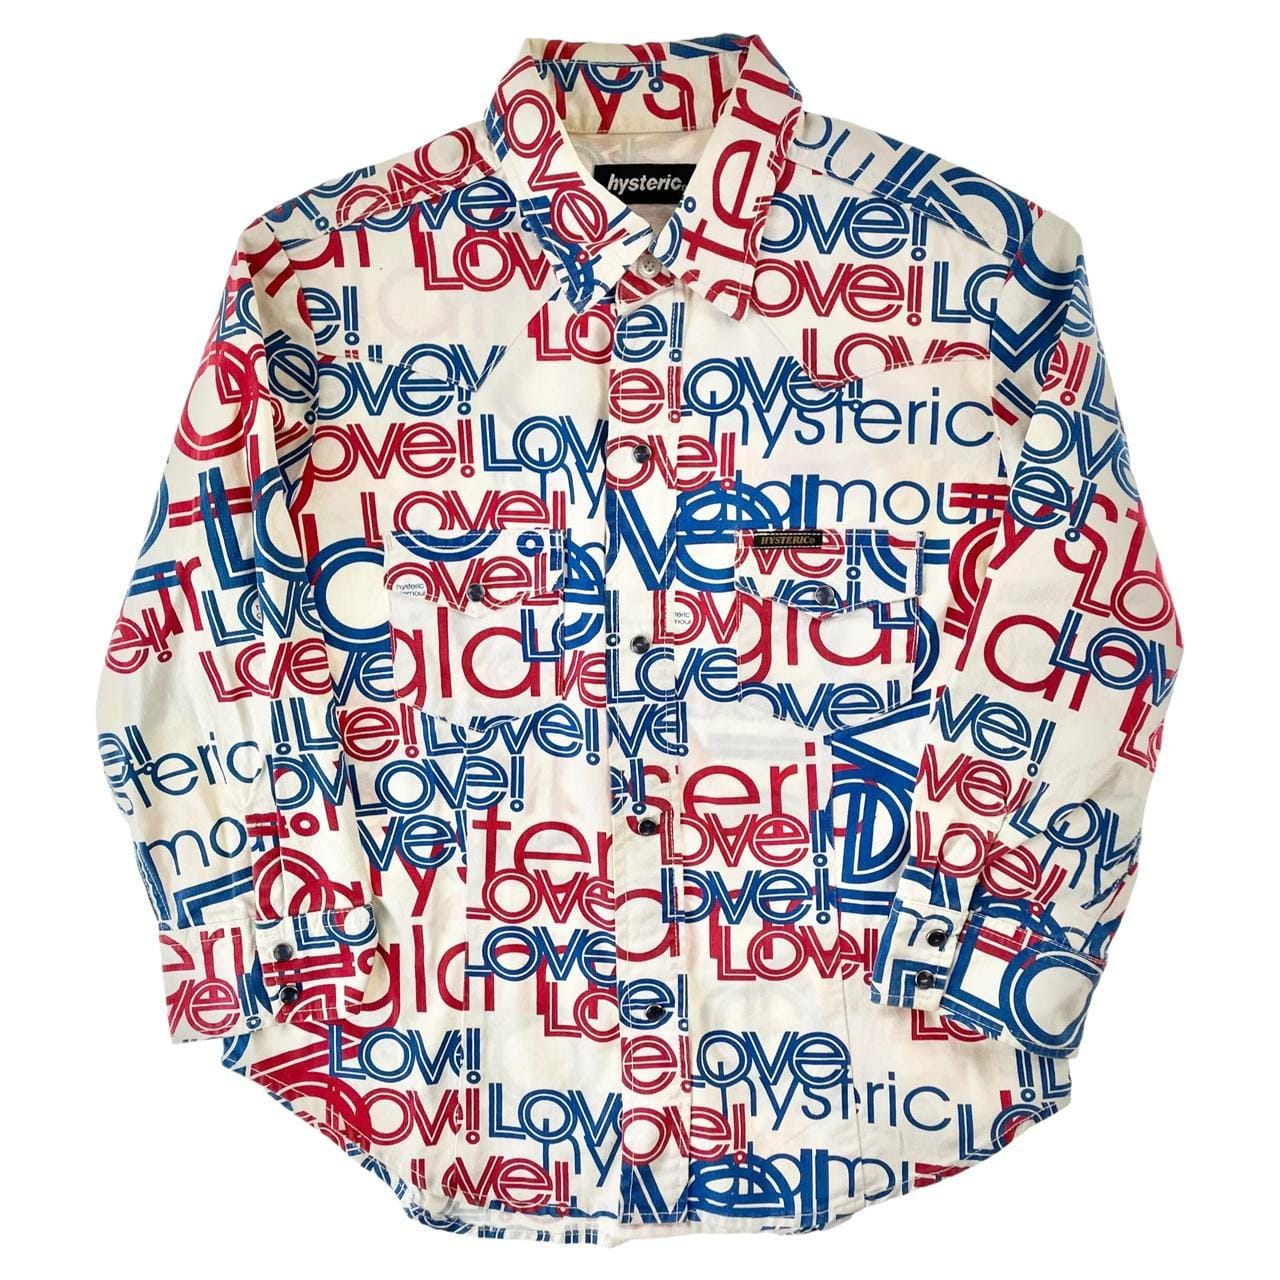 Vintage Hysteric Glamour all over print button shirt woman’s size S